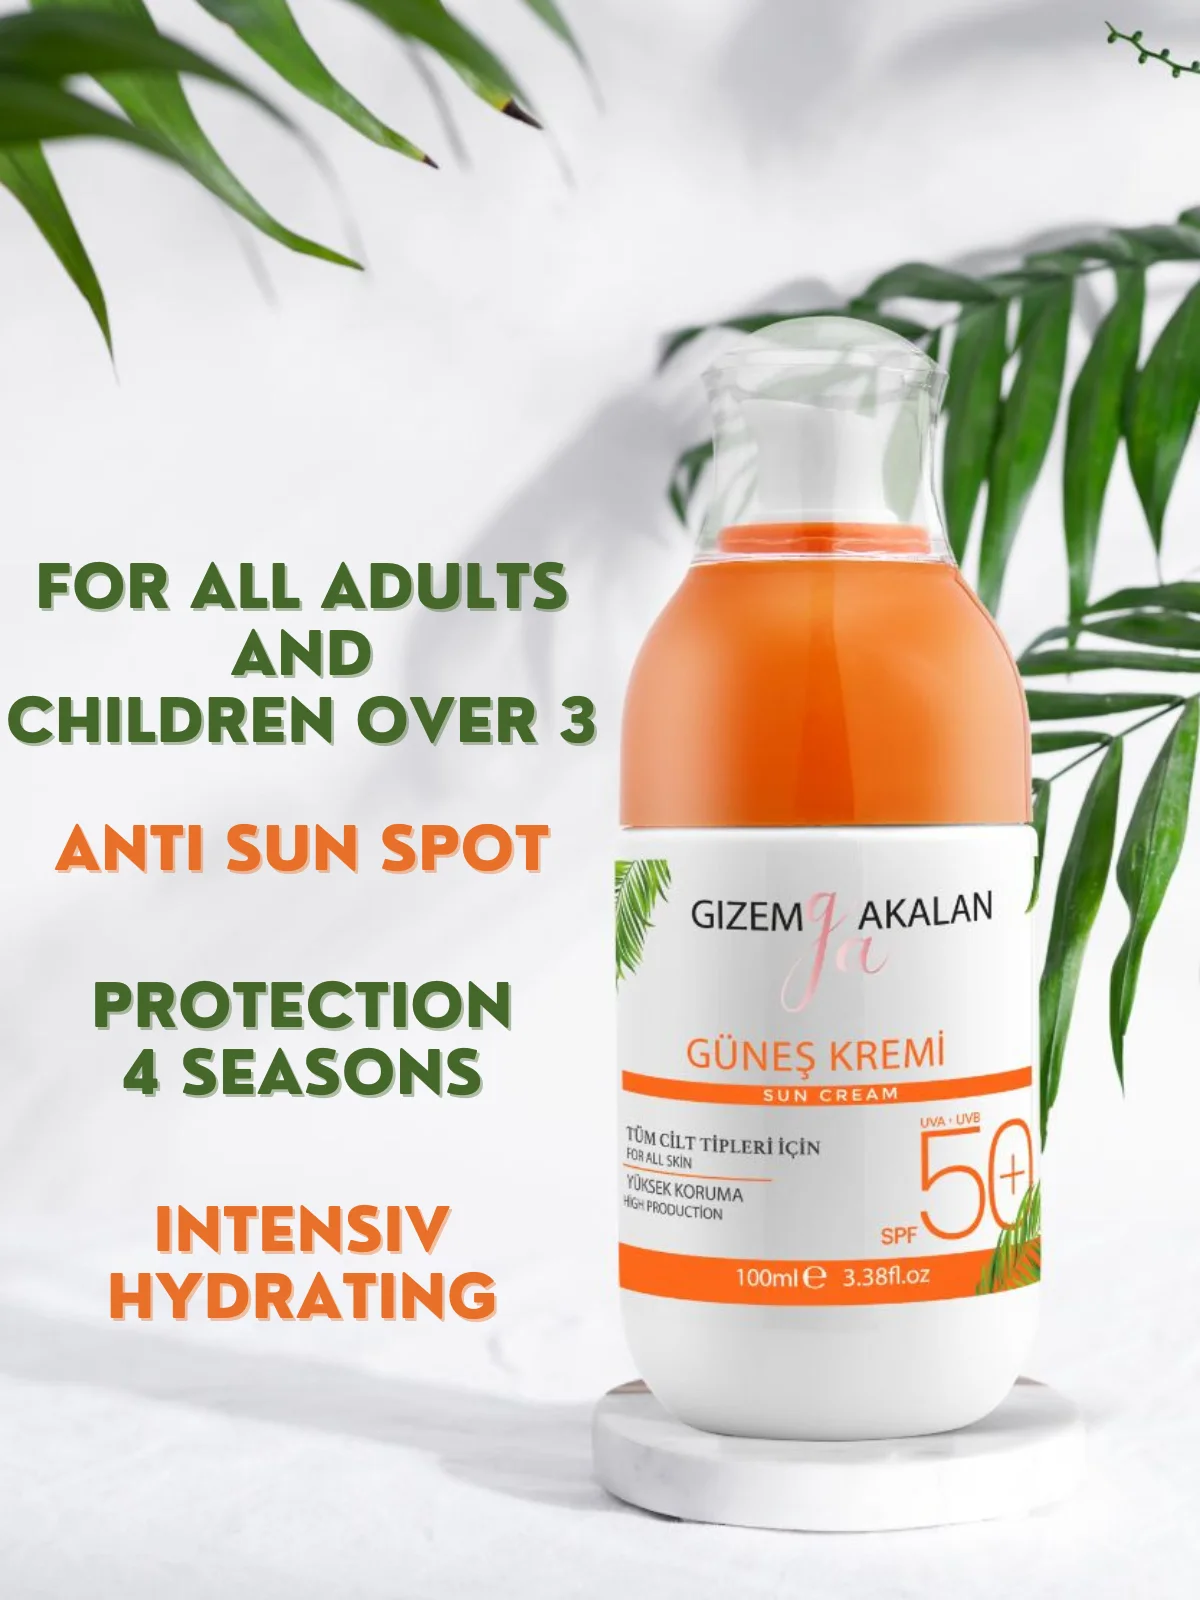 Gizem Akalan Sun Cream Spf 50+ 100 ML Anti Sun Spot Solar Protection Water Resistance For Adults And Kids Very High Protection enlarge